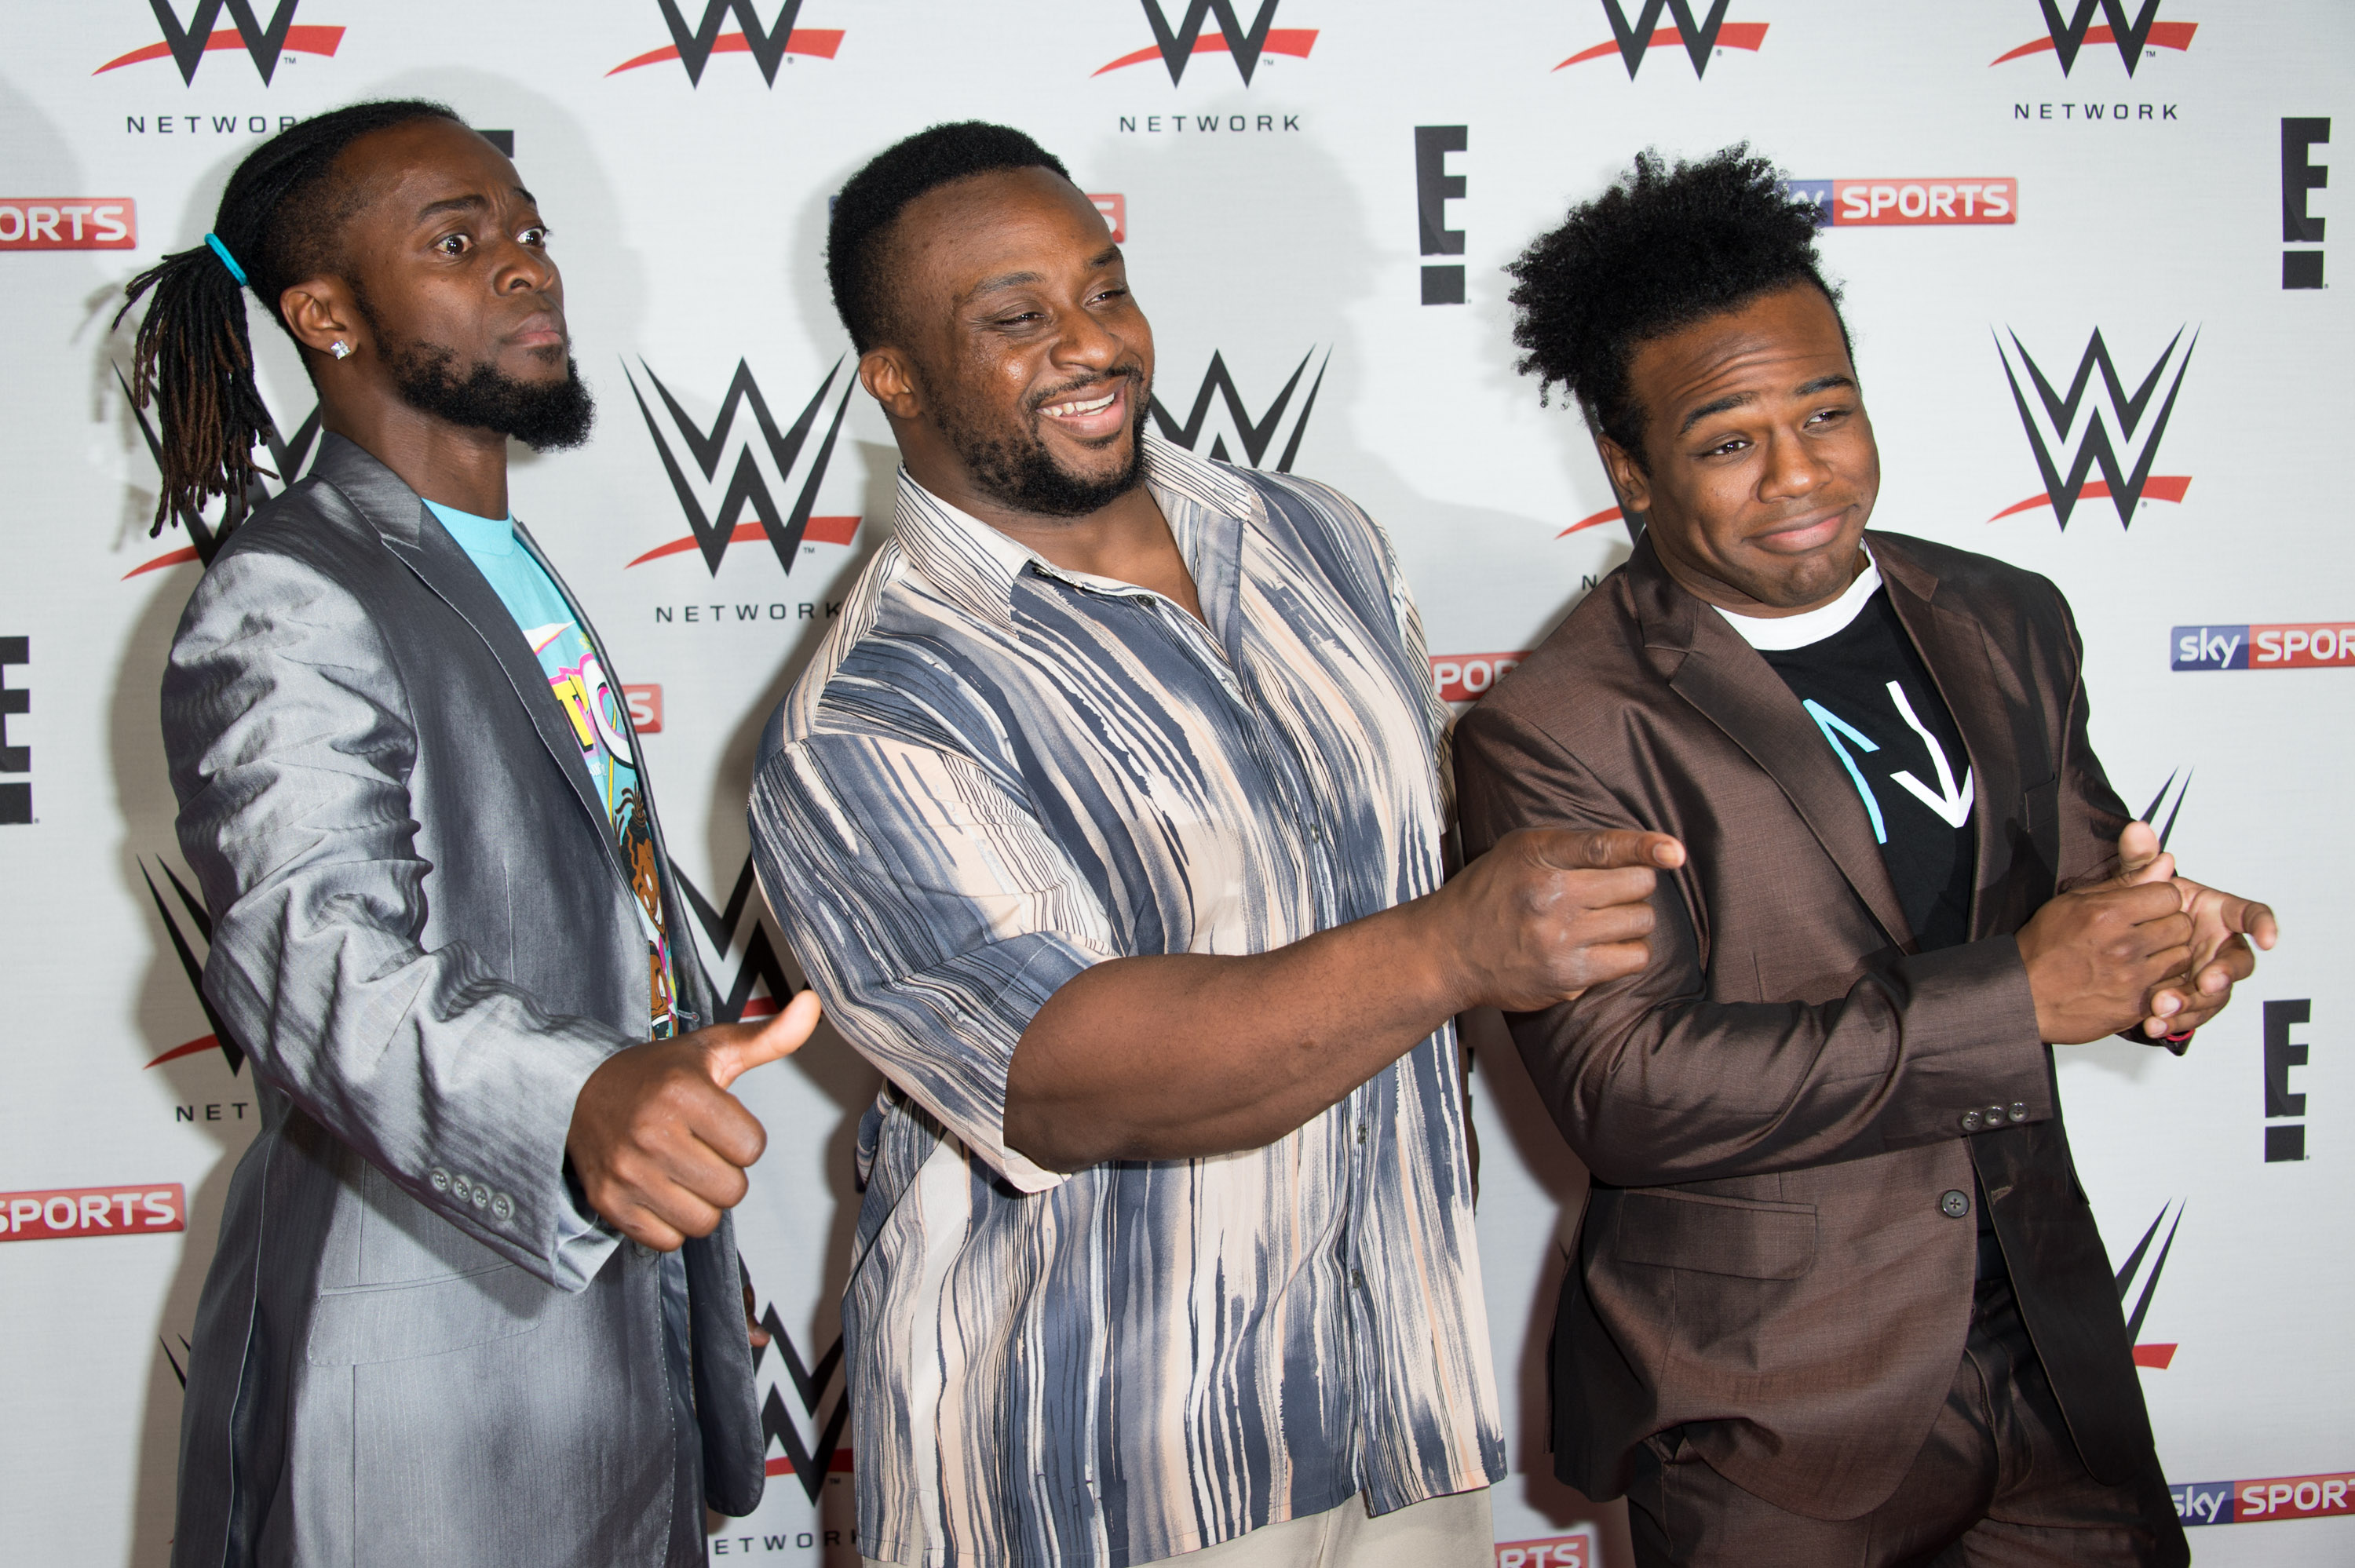 The New Day #14